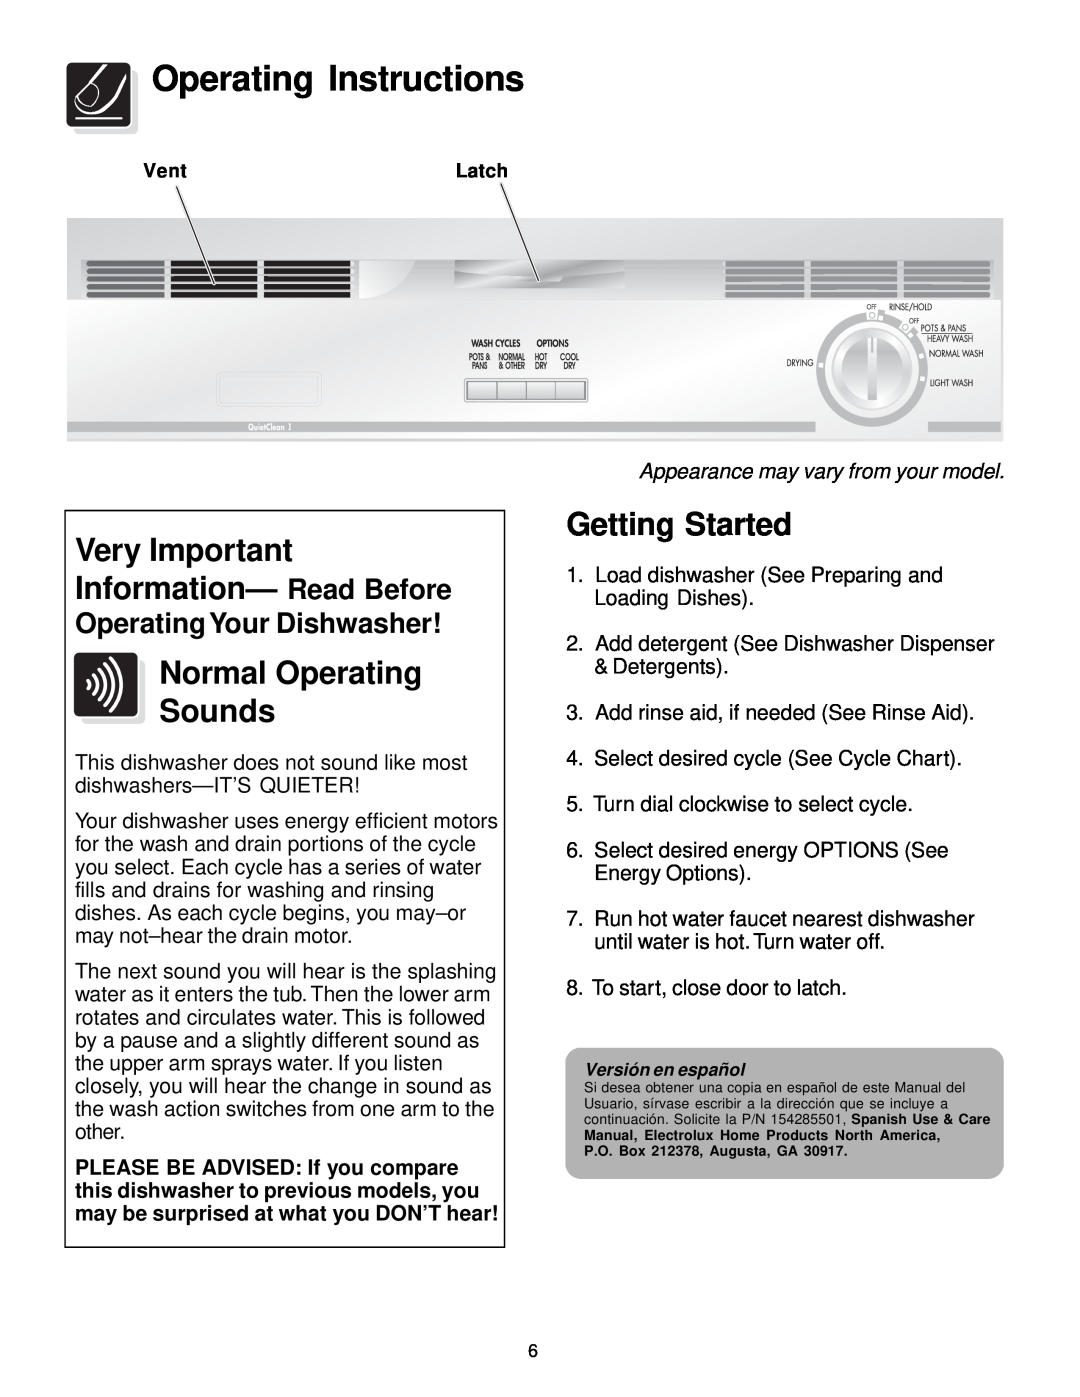 Frigidaire 400 Series warranty Operating Instructions, Very Important Information- Read Before, Normal Operating Sounds 